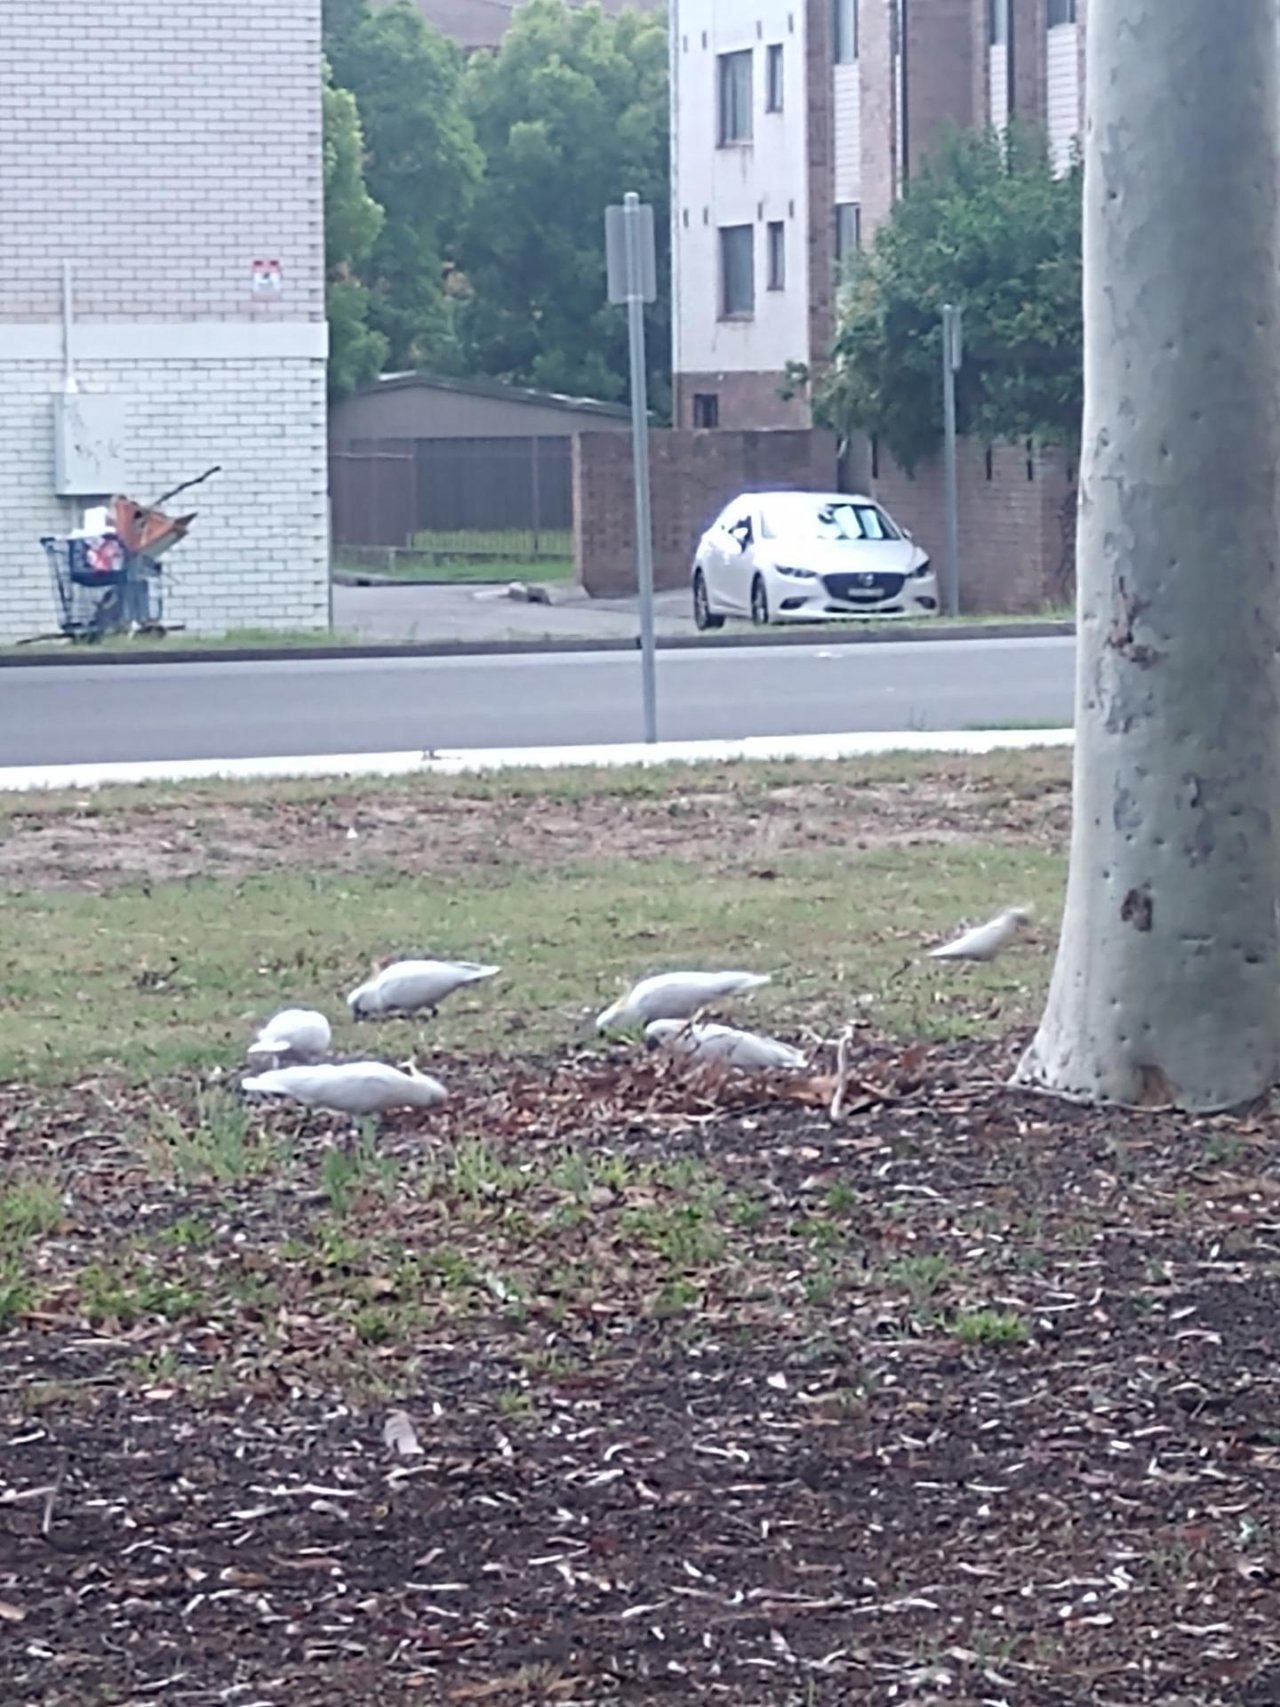 Sulphur-crested Cockatoo in Big City Birds App spotted by Anna on 16.12.2020